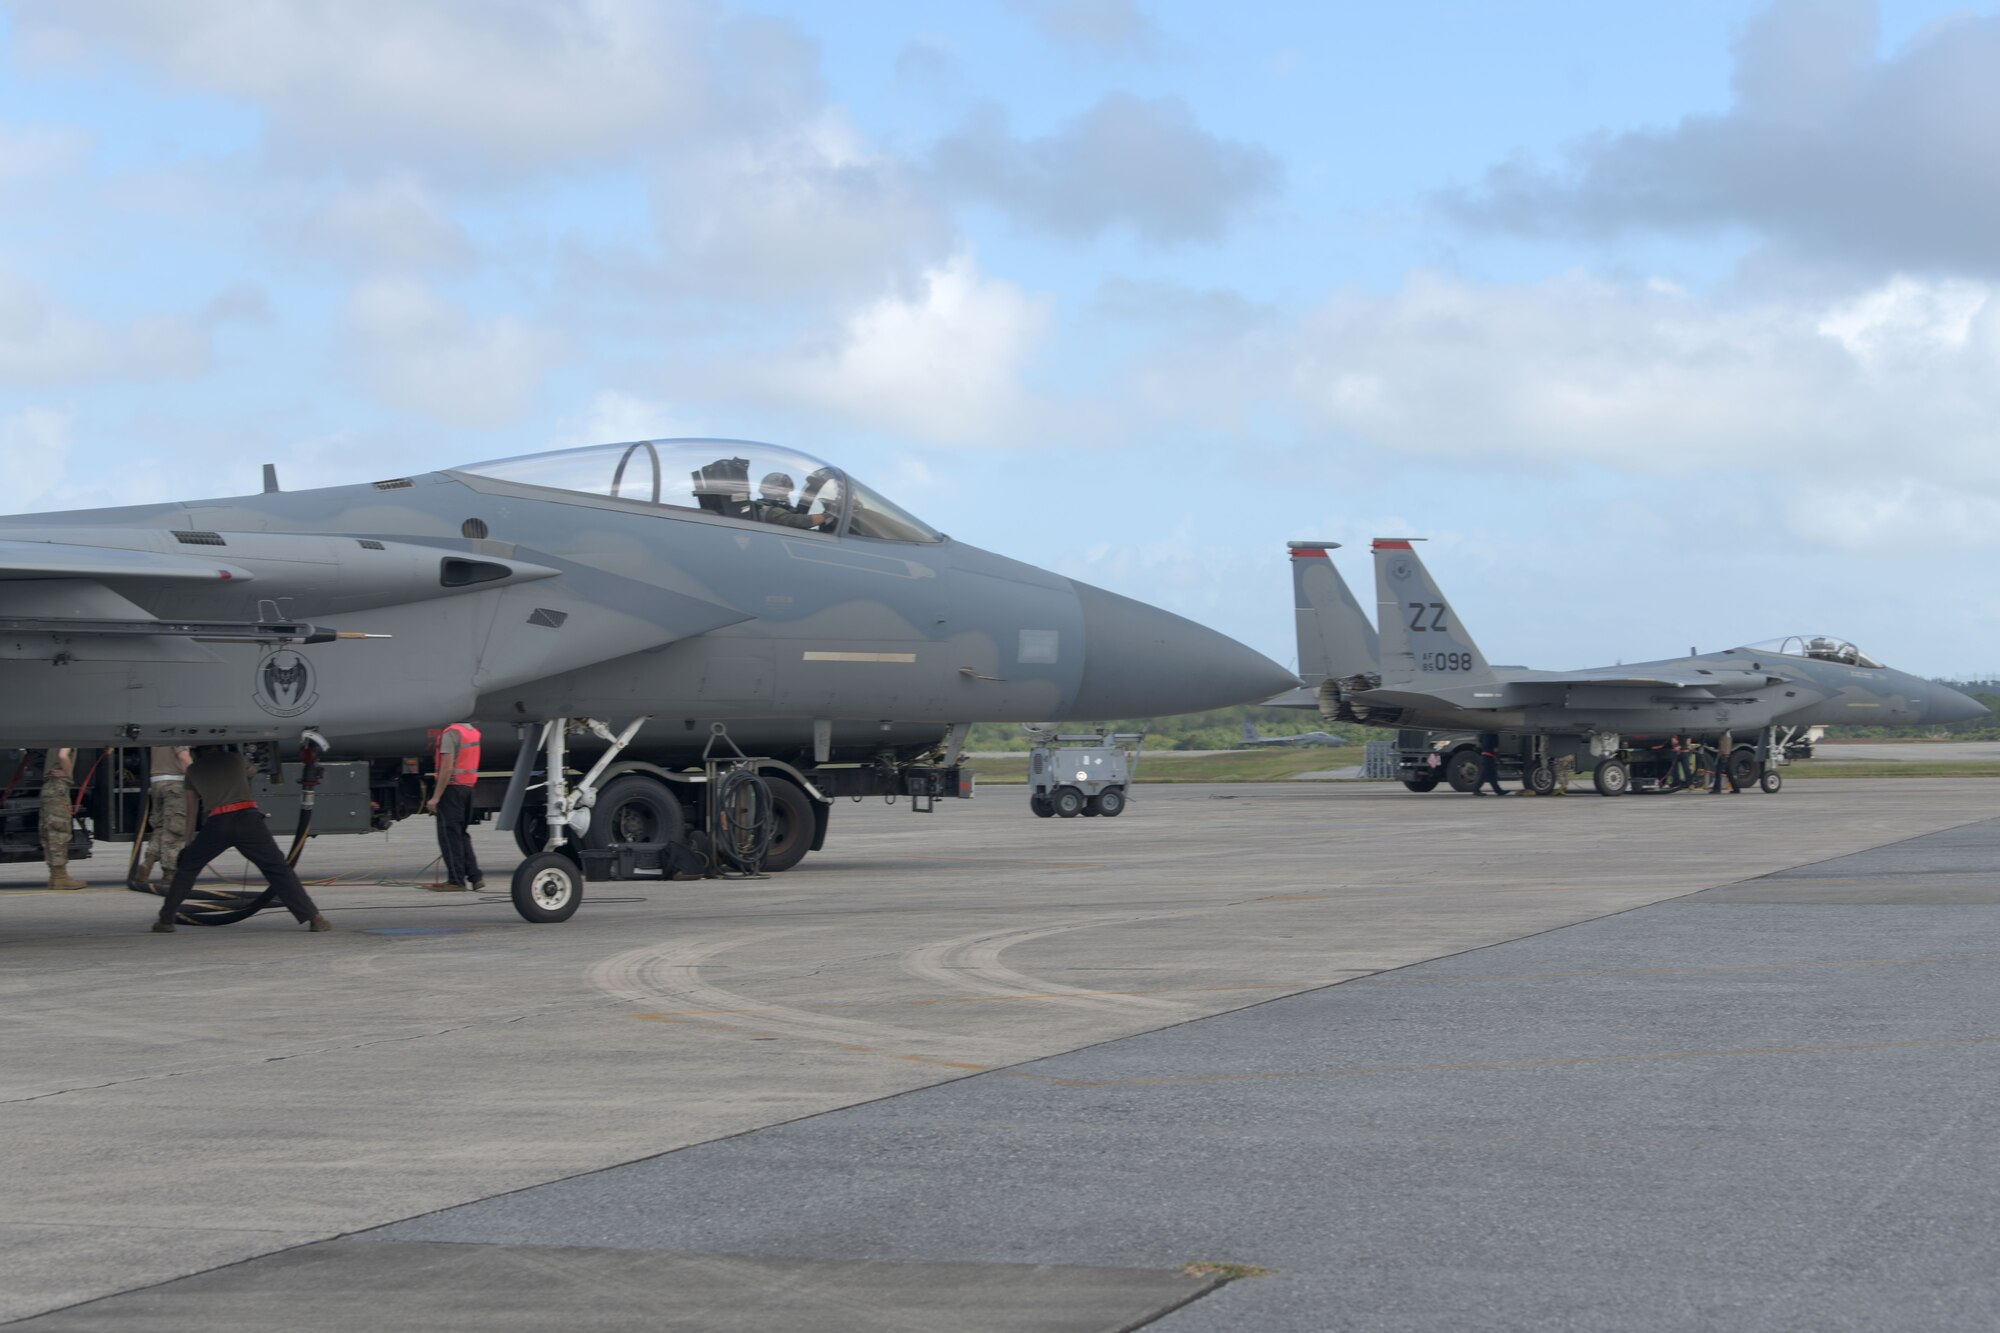 The 18th Logistics Readiness Squadron refuels two F-15C Eagles during a “Super Surge,” Nov. 18, 2020, at Kadena Air Base, Japan. The LRS team bested their most gallons in a single day since 2016 with 420,000 by the second day of the surge. (U.S. Air Force photo by Airman 1st Class Rebeckah Medeiros)